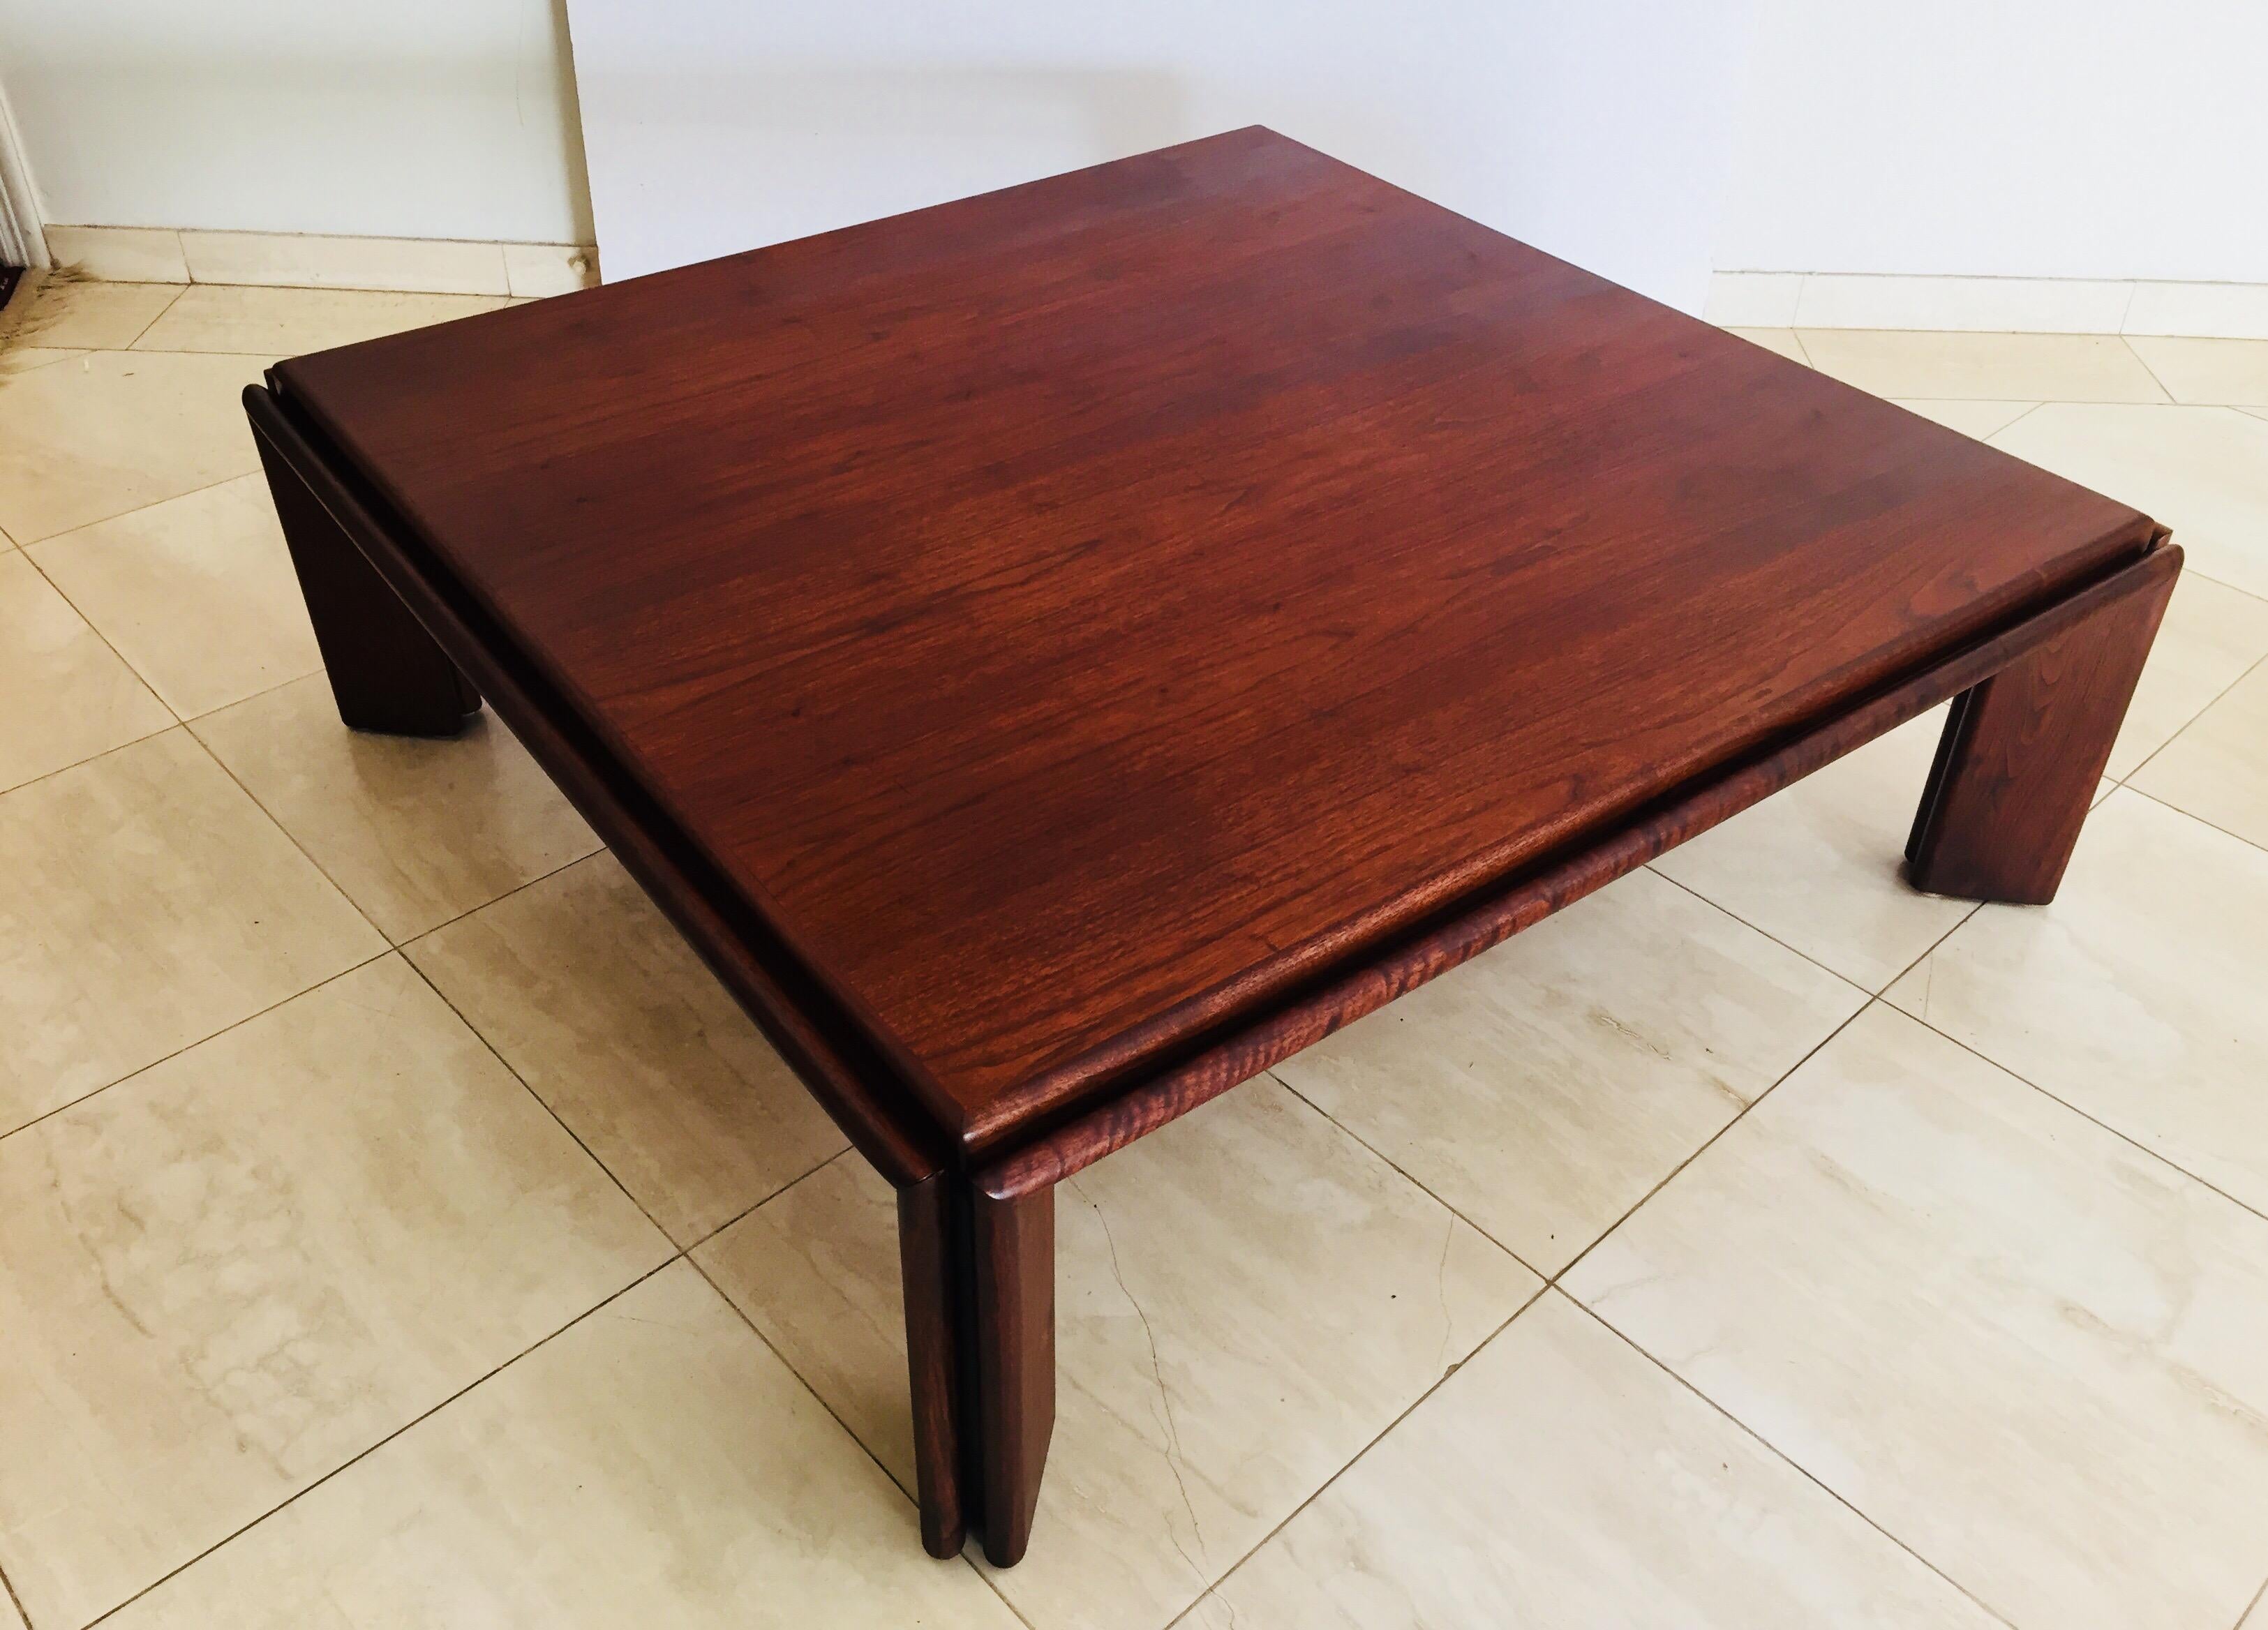 Extra large wood coffee table attributed to Afra and Tobia Scarpa.
Great fine wood veneers rosewood like give this table a unique and gorgeous wood grain patterns and color.
Square shape, beautiful modern contemporary design.
Italy, circa 1970s.